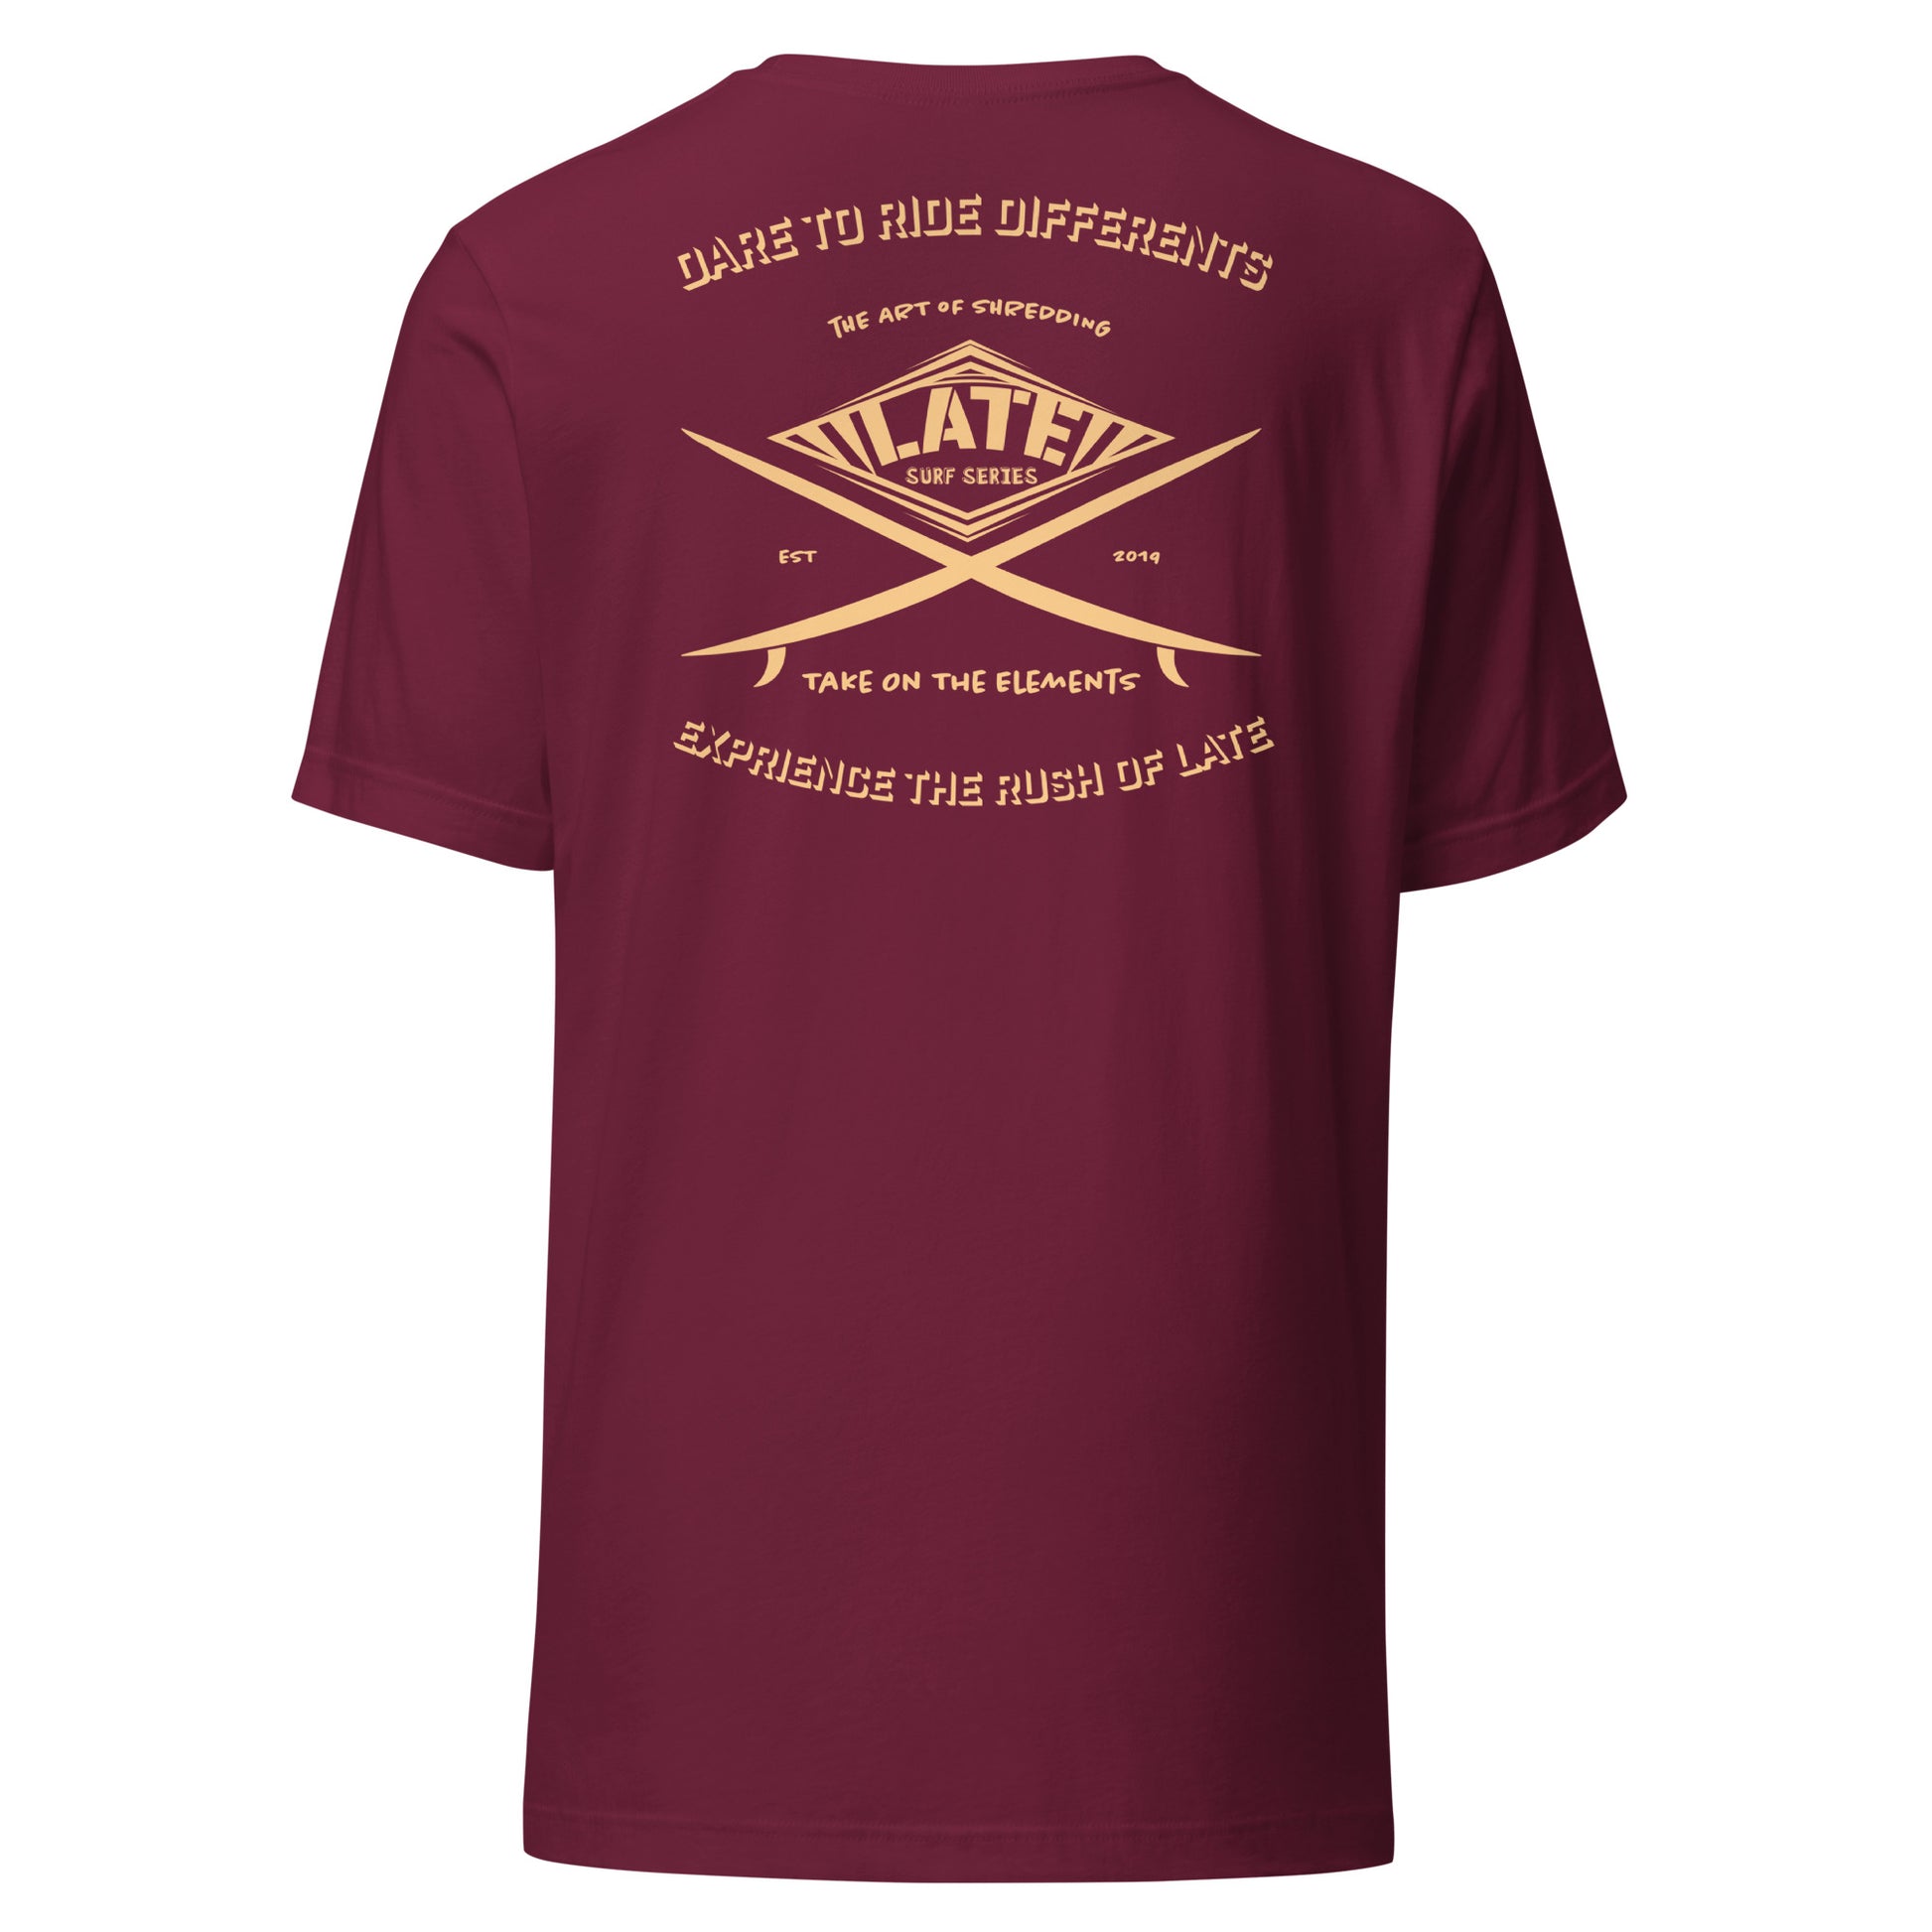 T-Shirt Take On The Elements, planche de surf logo Late et texte inspirant surfeur dare to ride differents, the art of shredding, experience the rush of Late. Style Hurley de dos et couleur bordeaux